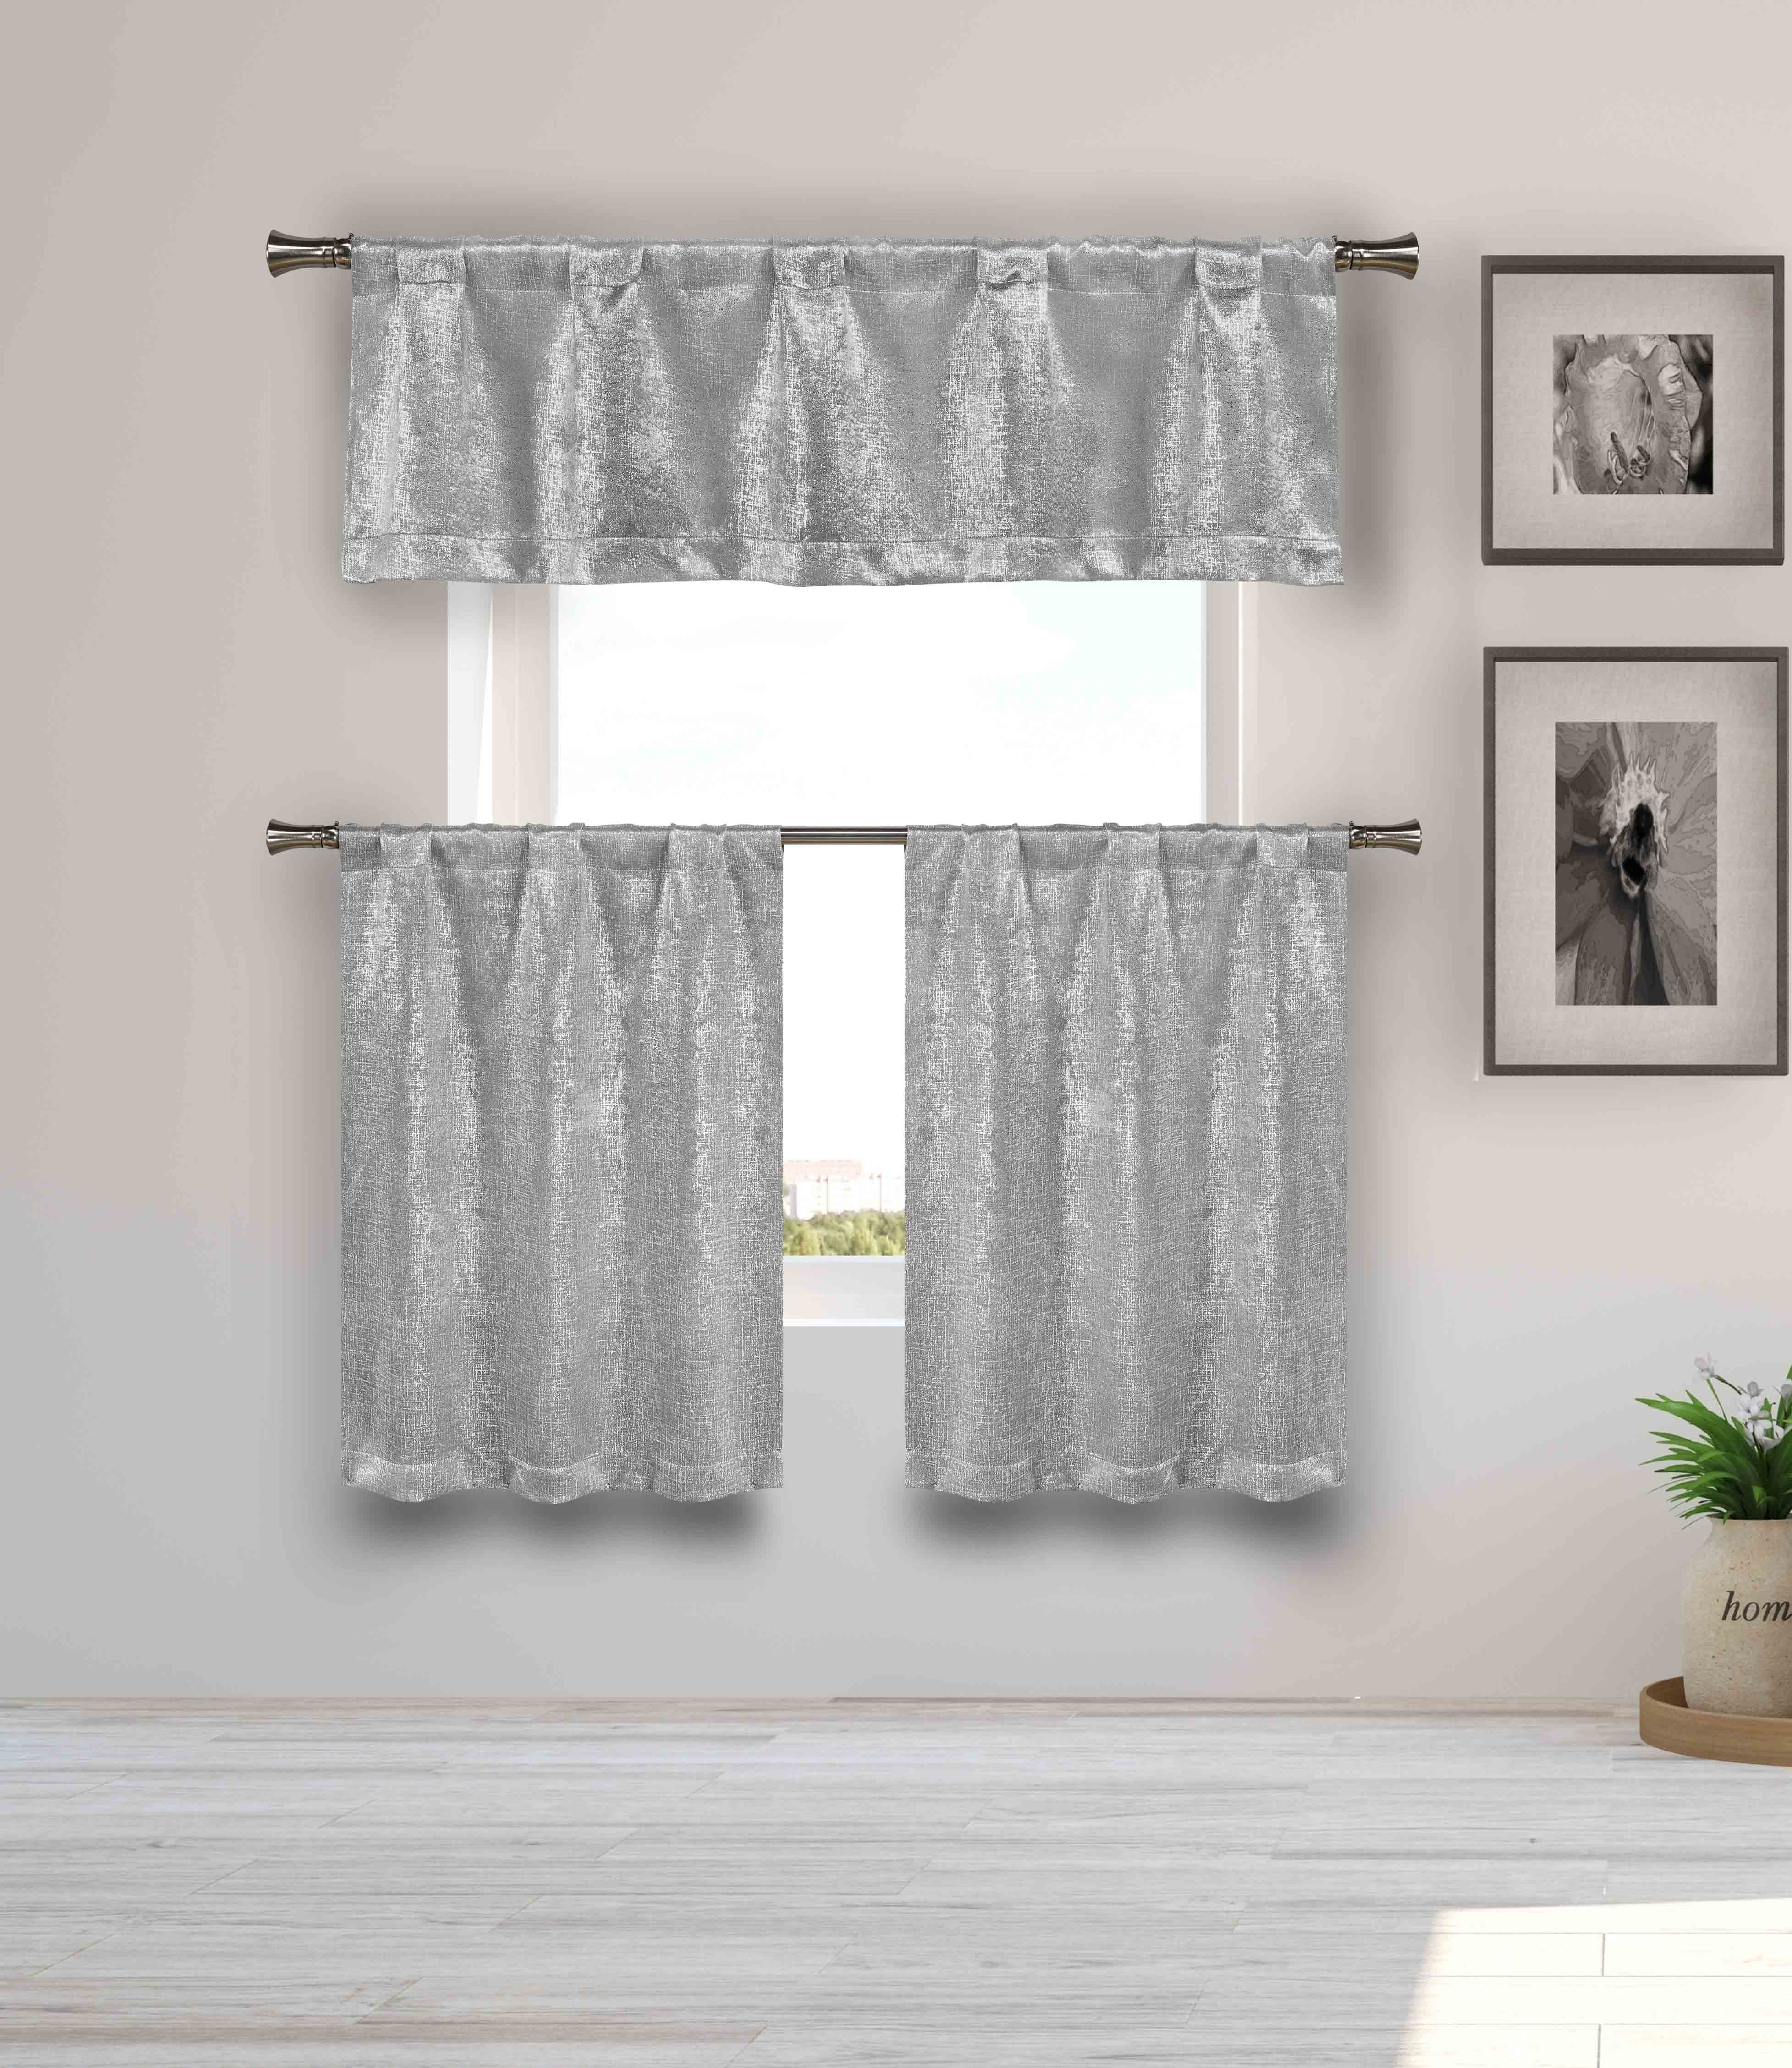 Blackout Energy Saving Gray 3 Piece Window Curtain Set with Silver